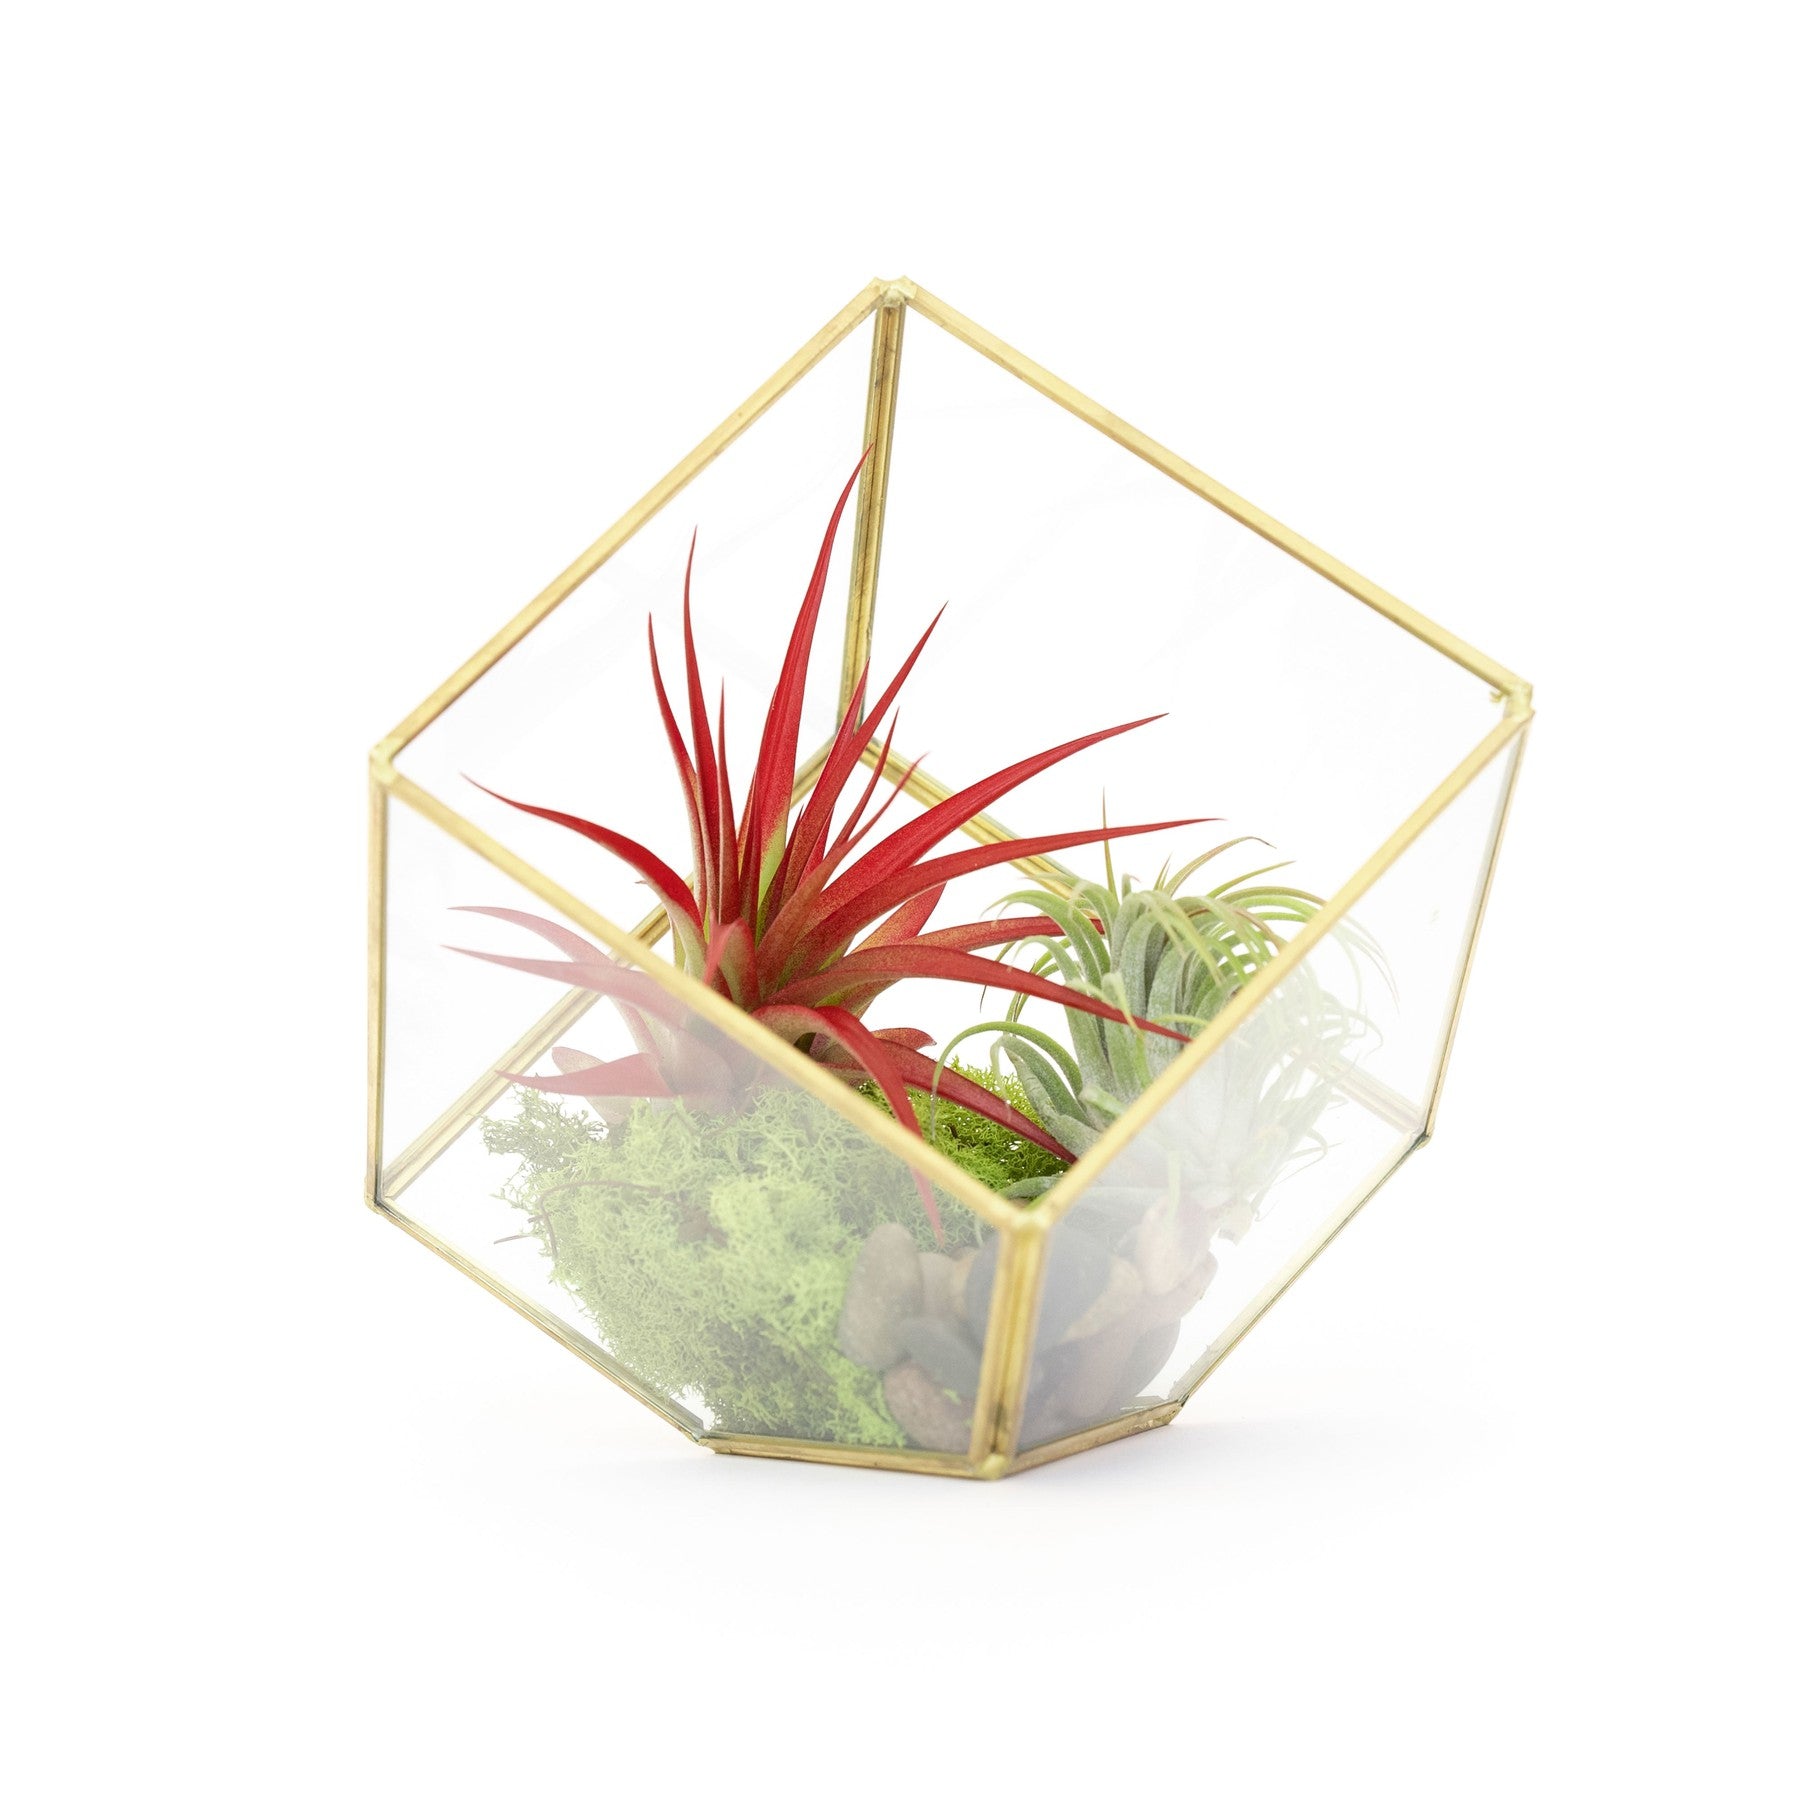 Heptahedron Geometric Glass Terrarium with Tillandsia Red Abdita and Ionantha Air Plants-gift-The Succulent Source